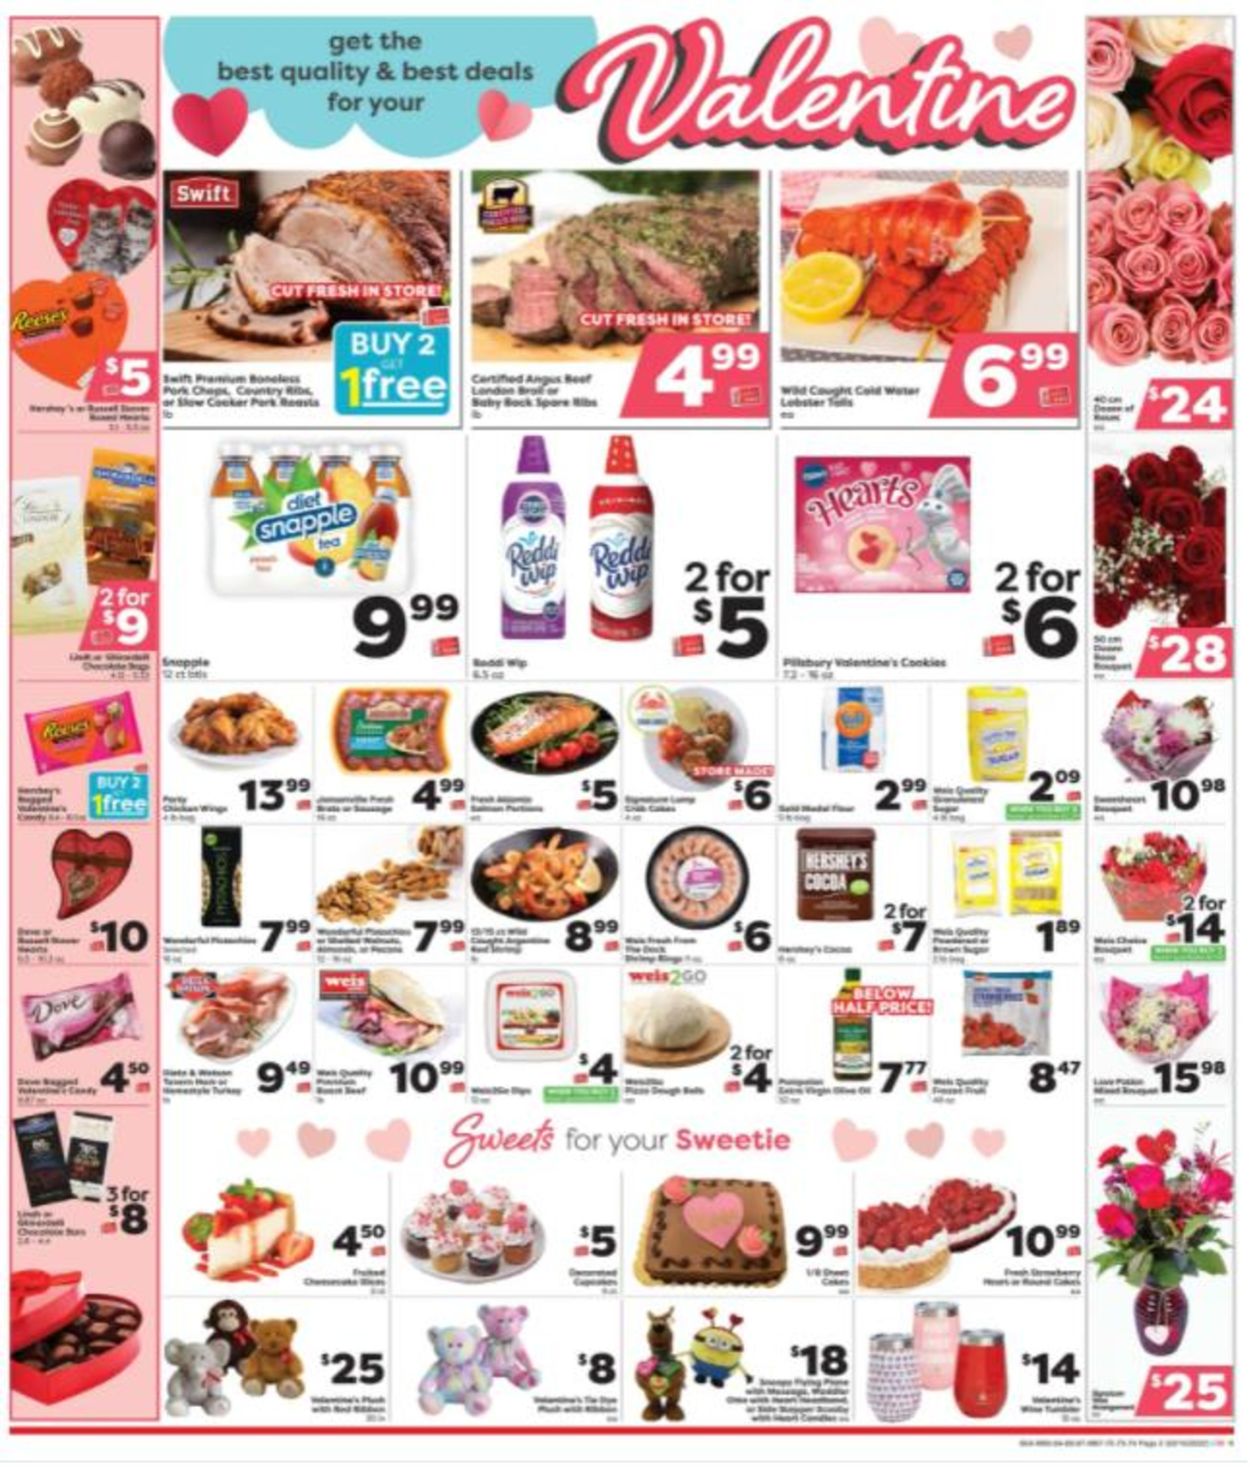 Weis Ad from 02/10/2022